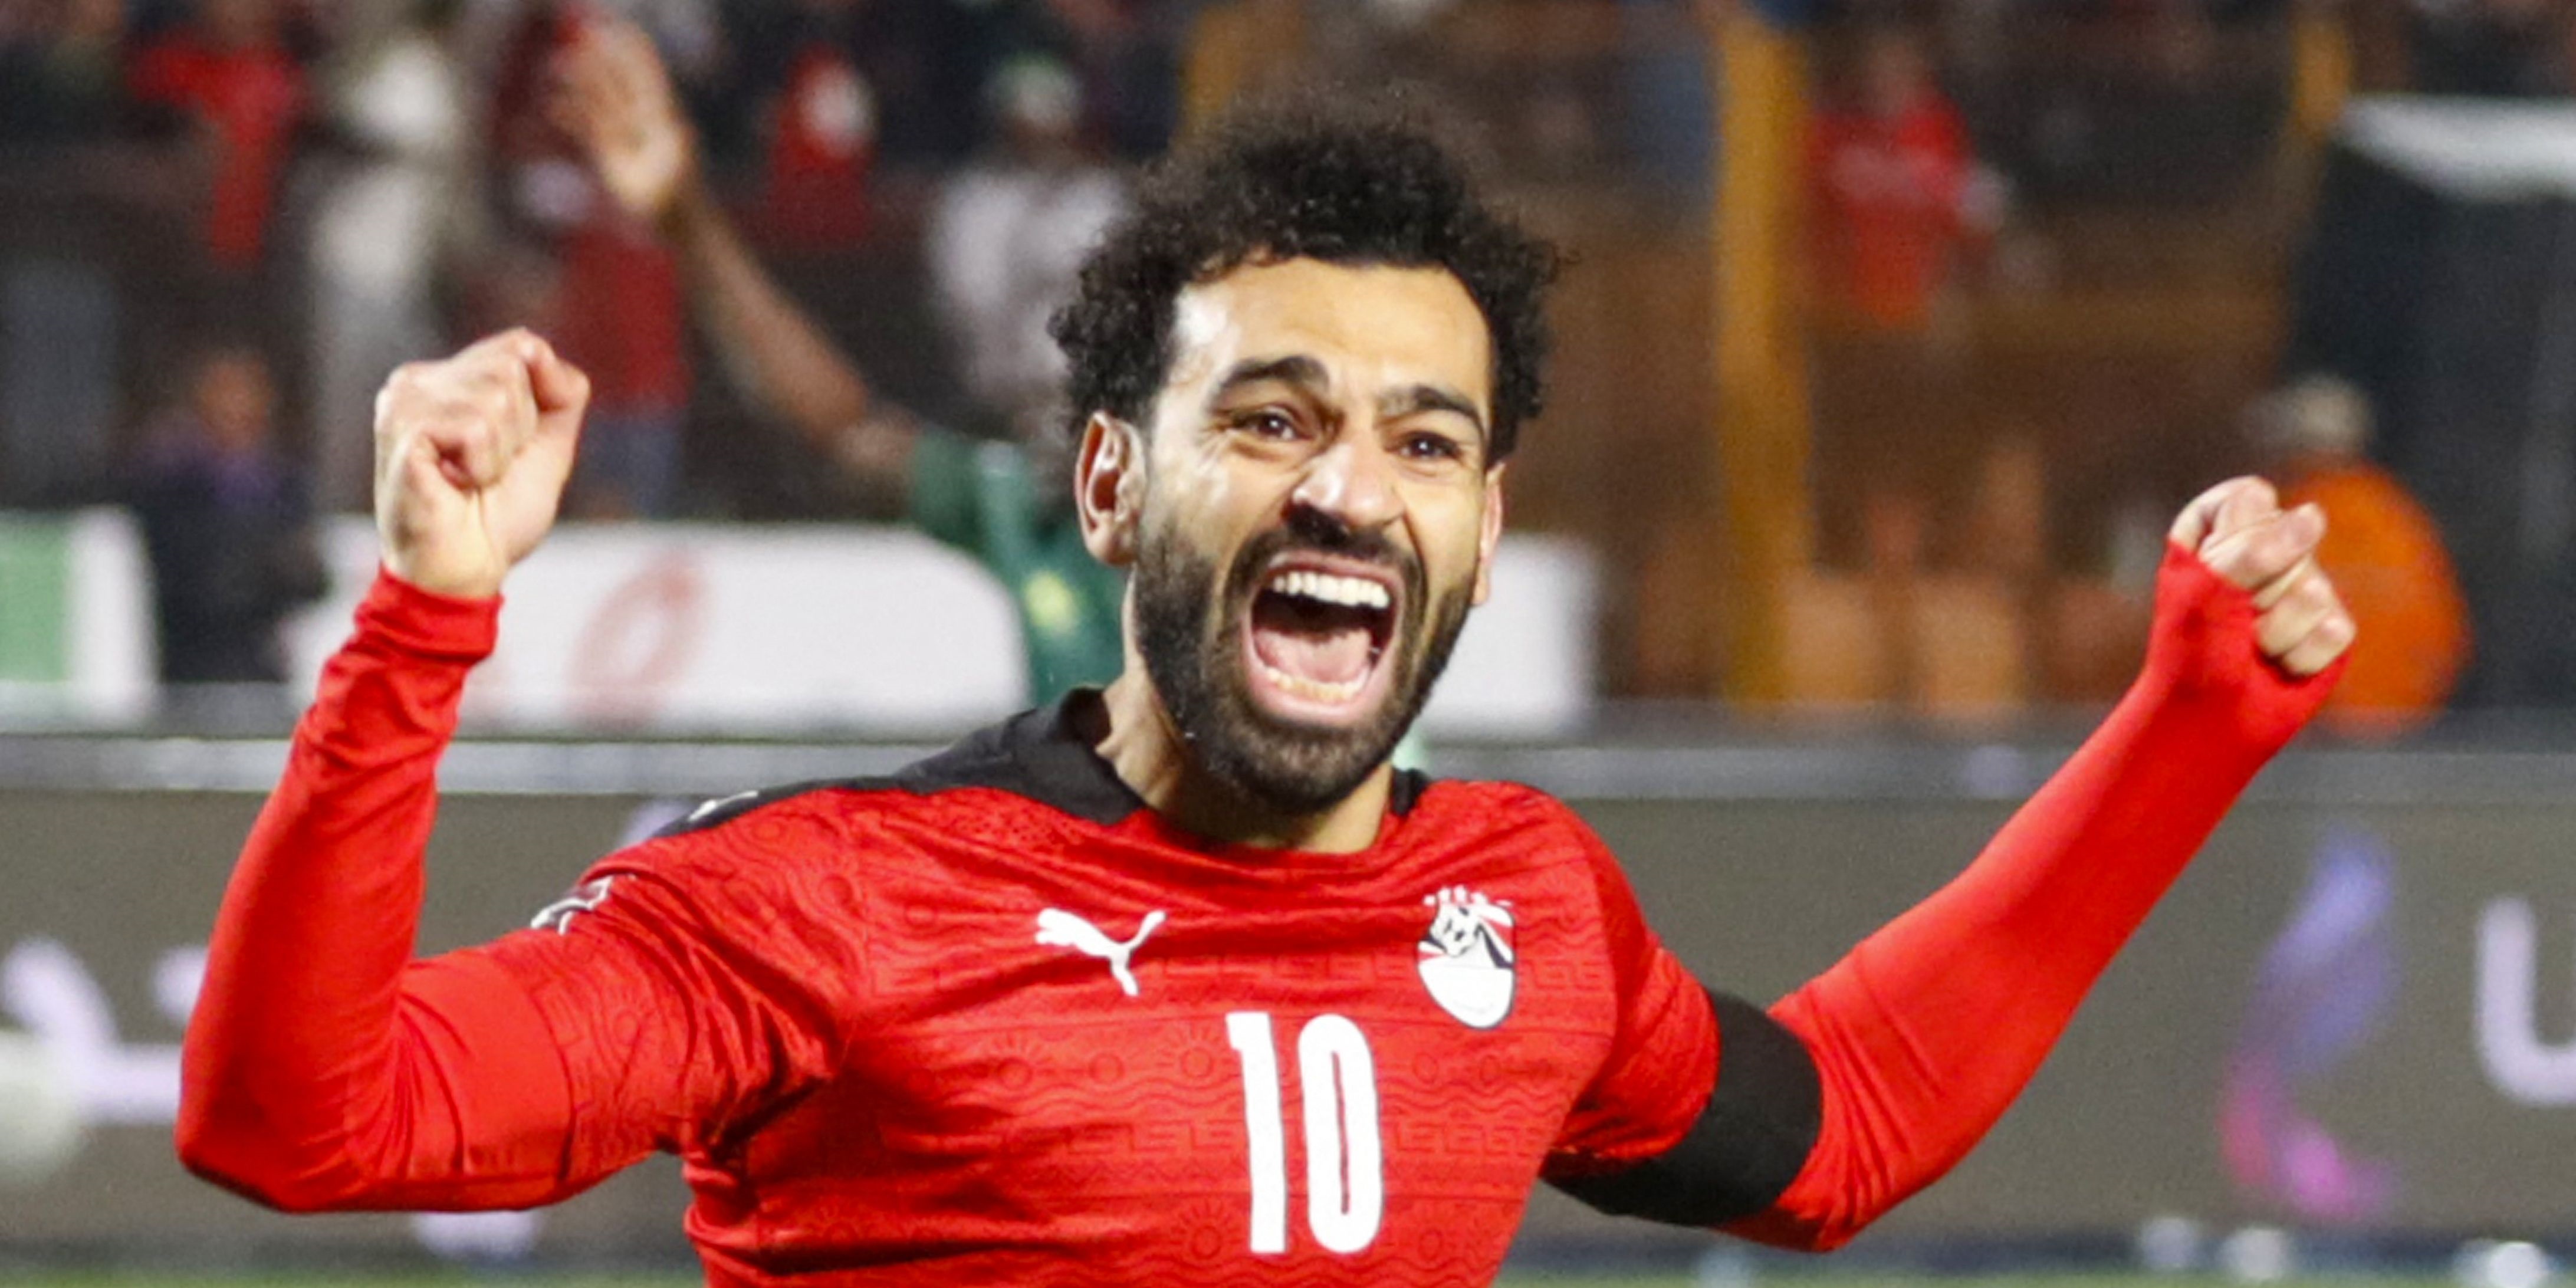 Egyptian sports minister shares bizarre Salah advice & Liverpool star’s decision on contract talks